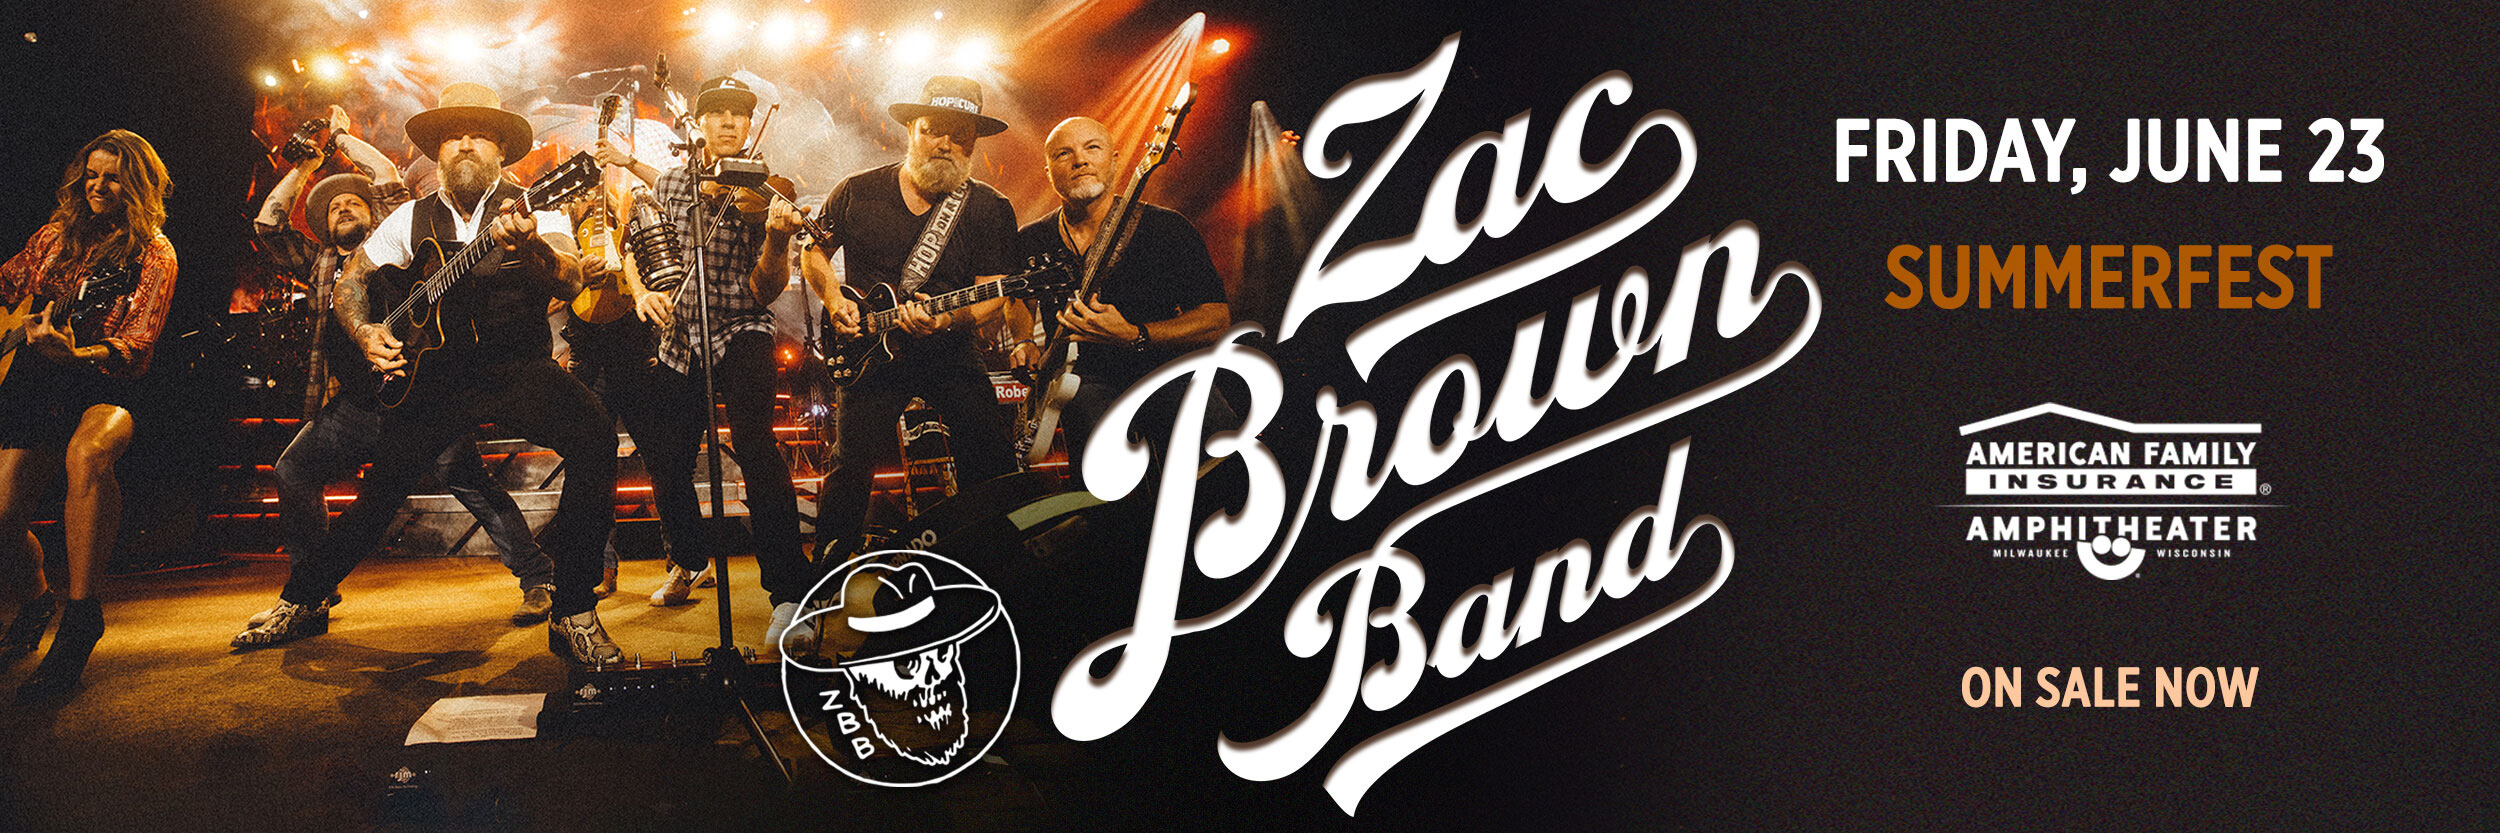 Grammy Award-winning group, Zac Brown Band will headline the American Family Insurance Amphitheater during Summerfest on Friday, June 23, 2023